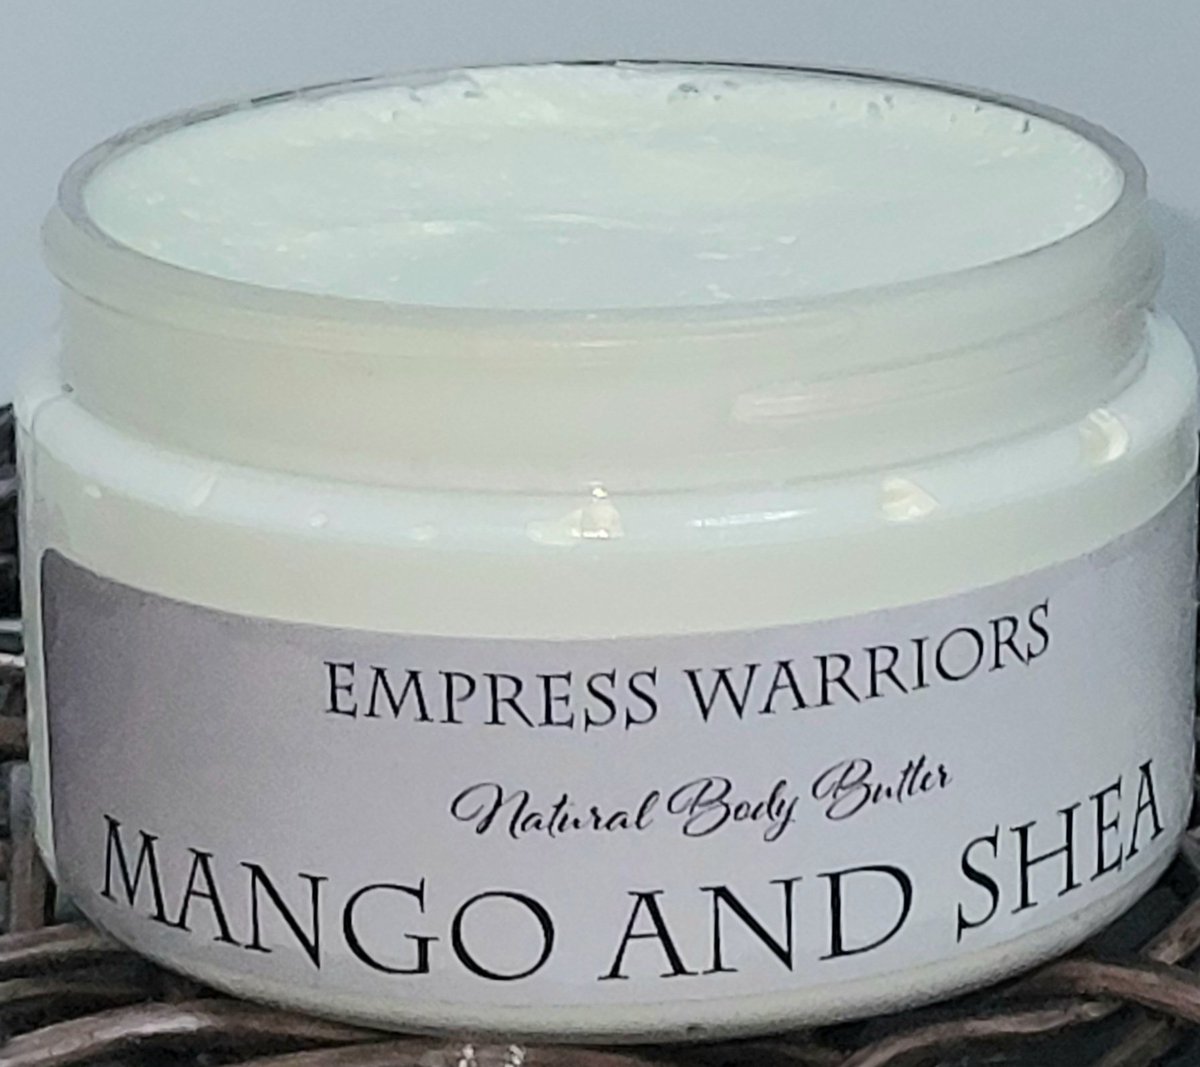 Try our mango and Shea body butter for silky smooth and radiant skin. It hydrates and revitalizes your skin, leaving it feeling soft, supple, and rejuvenated. Experience the ultimate pampering for your skin today.# Empress Warriors LLC #BodyButter ✨️